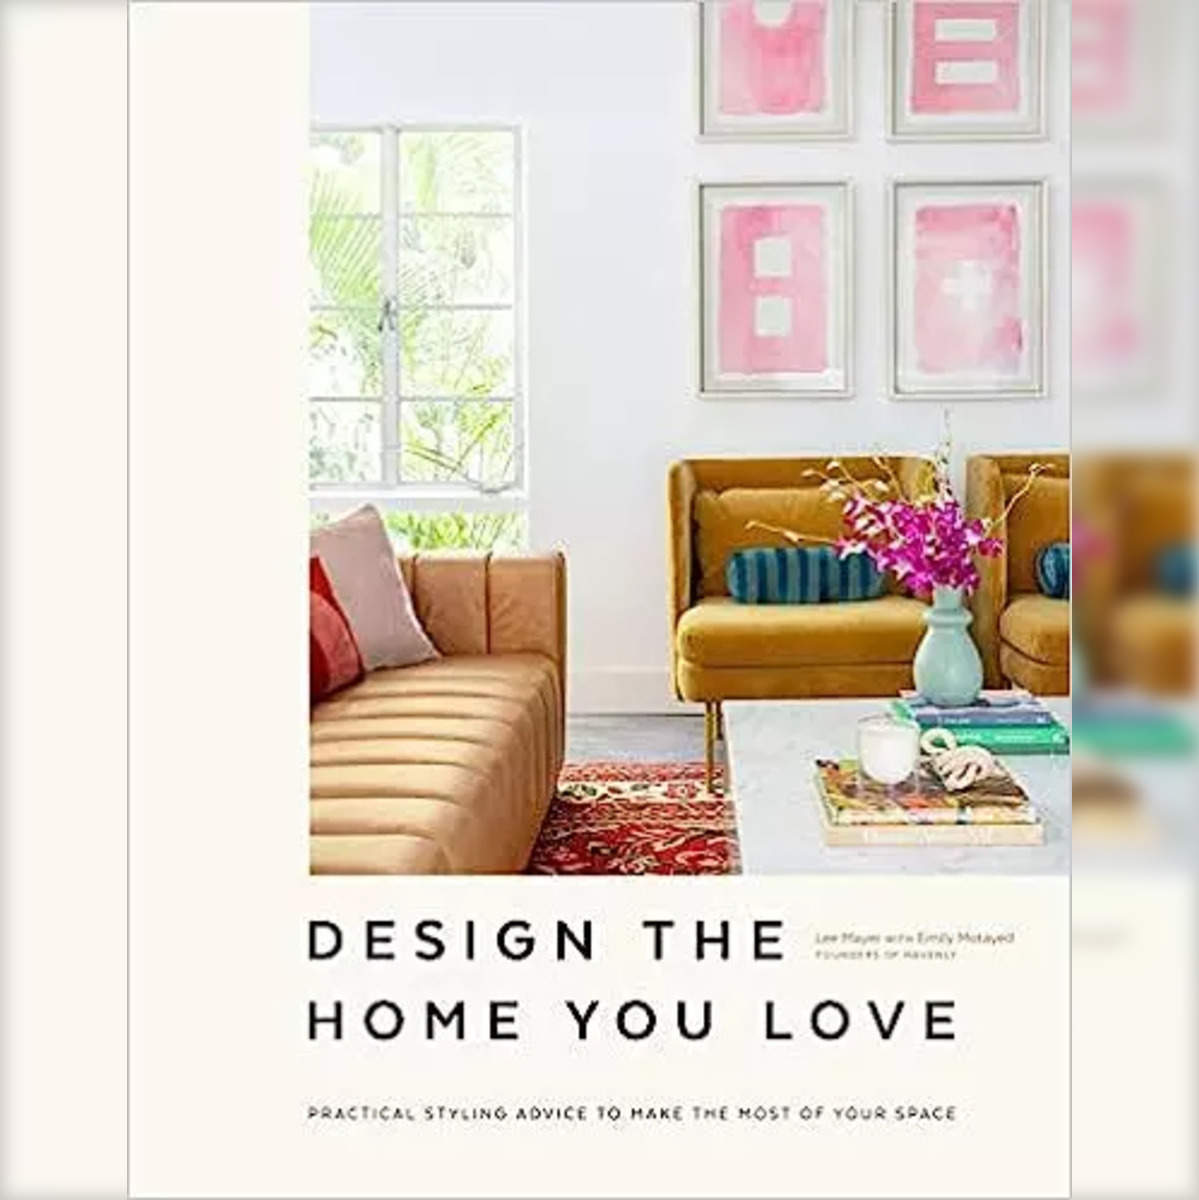 interior design books: Interior Design Books - 9 best books to learn all  about Interior Design - The Economic Times